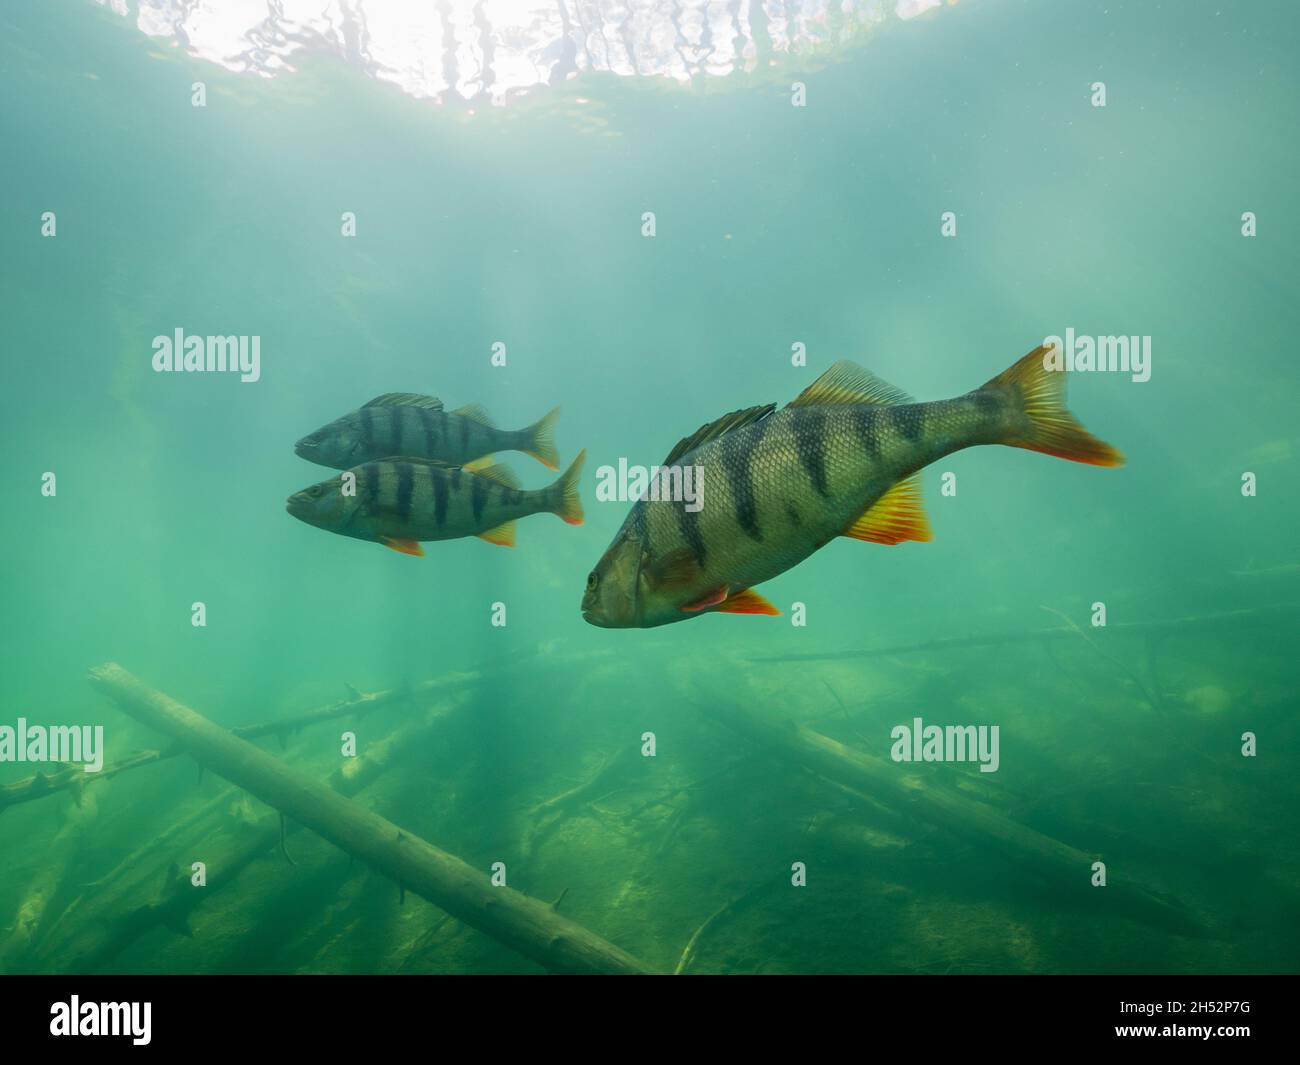 Group of big perch swimming in lake Stock Photo